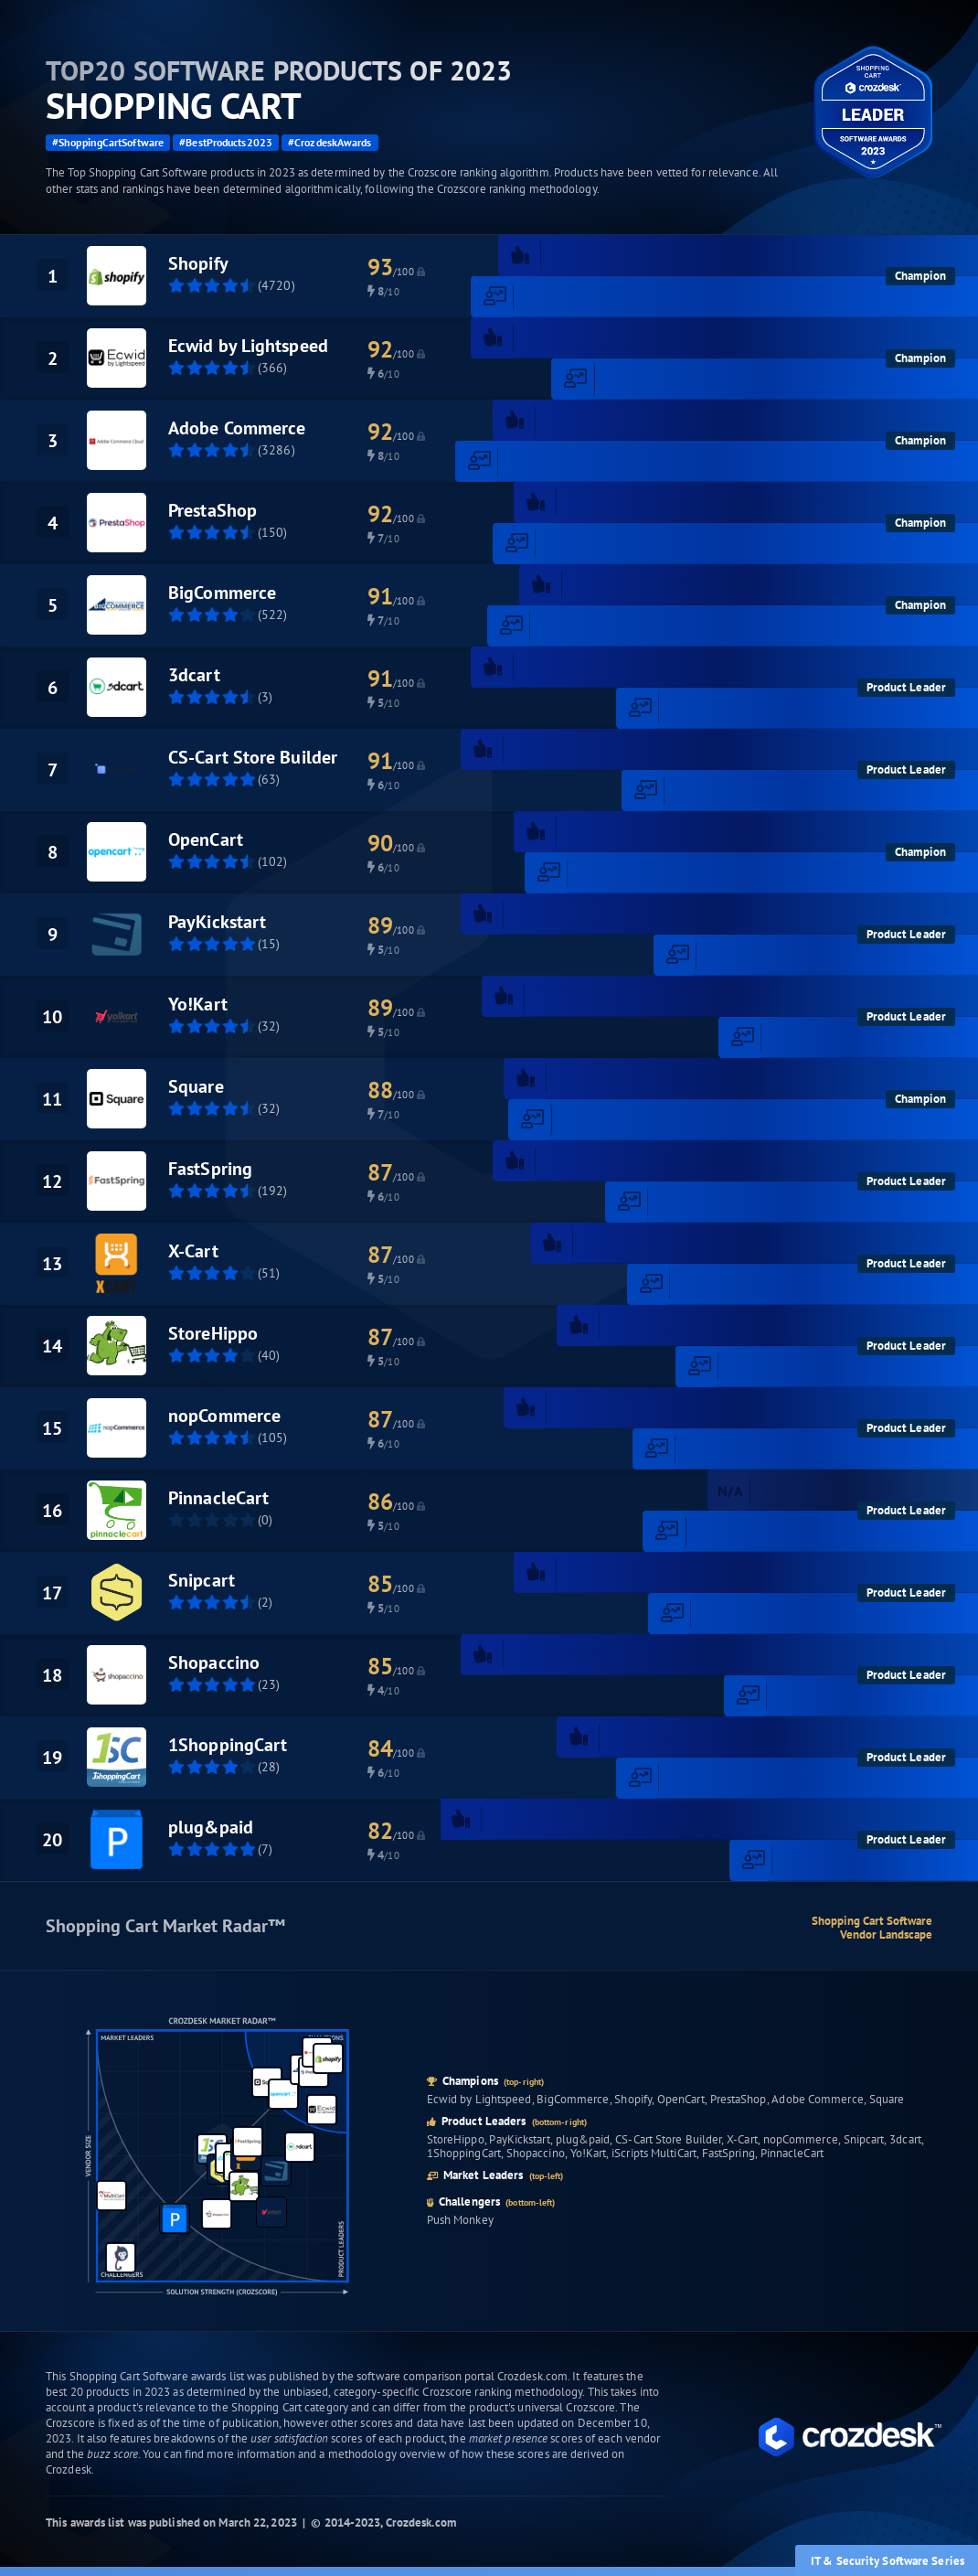 Top 20 Shopping Cart Software of 2023 Infographic